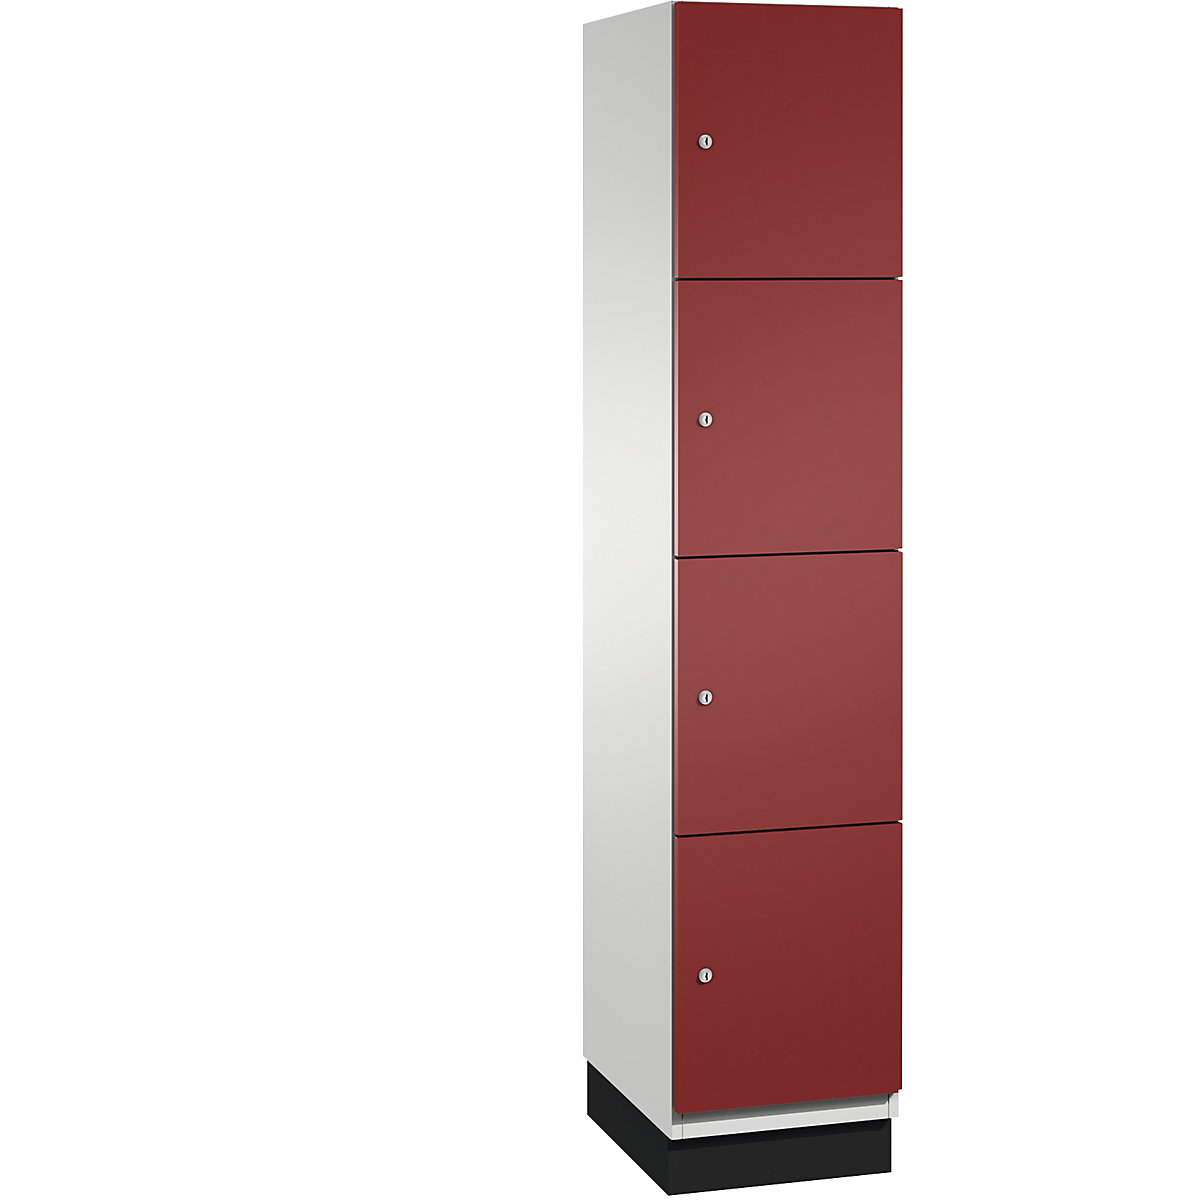 CAMBIO compartment locker with sheet steel doors – C+P, 4 compartments, width 400 mm, body light grey / door ruby red-6